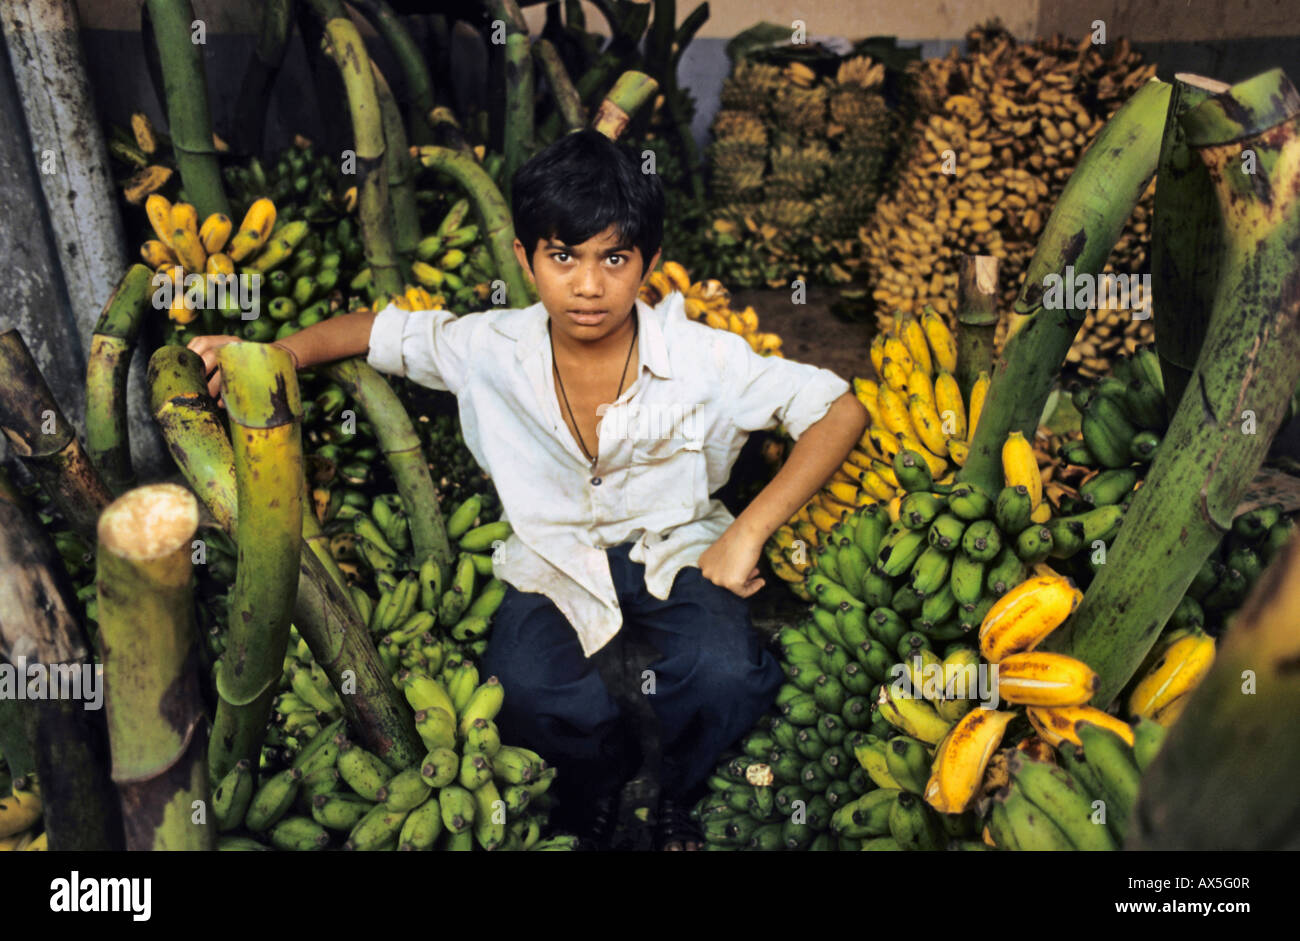 Child labour, selling bananas, India Stock Photo